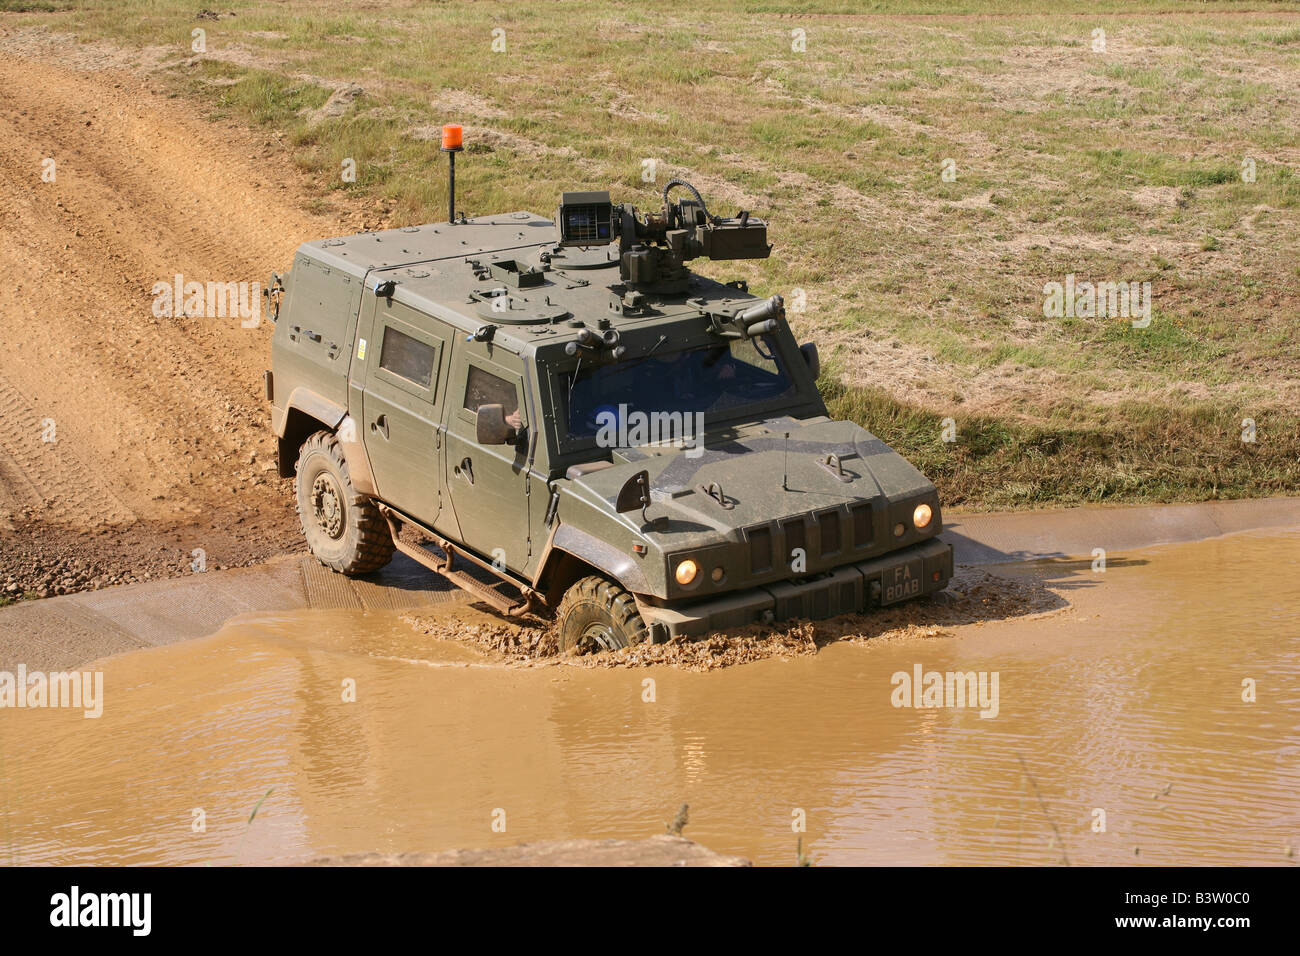 Panther army vehicle going through water Stock Photo